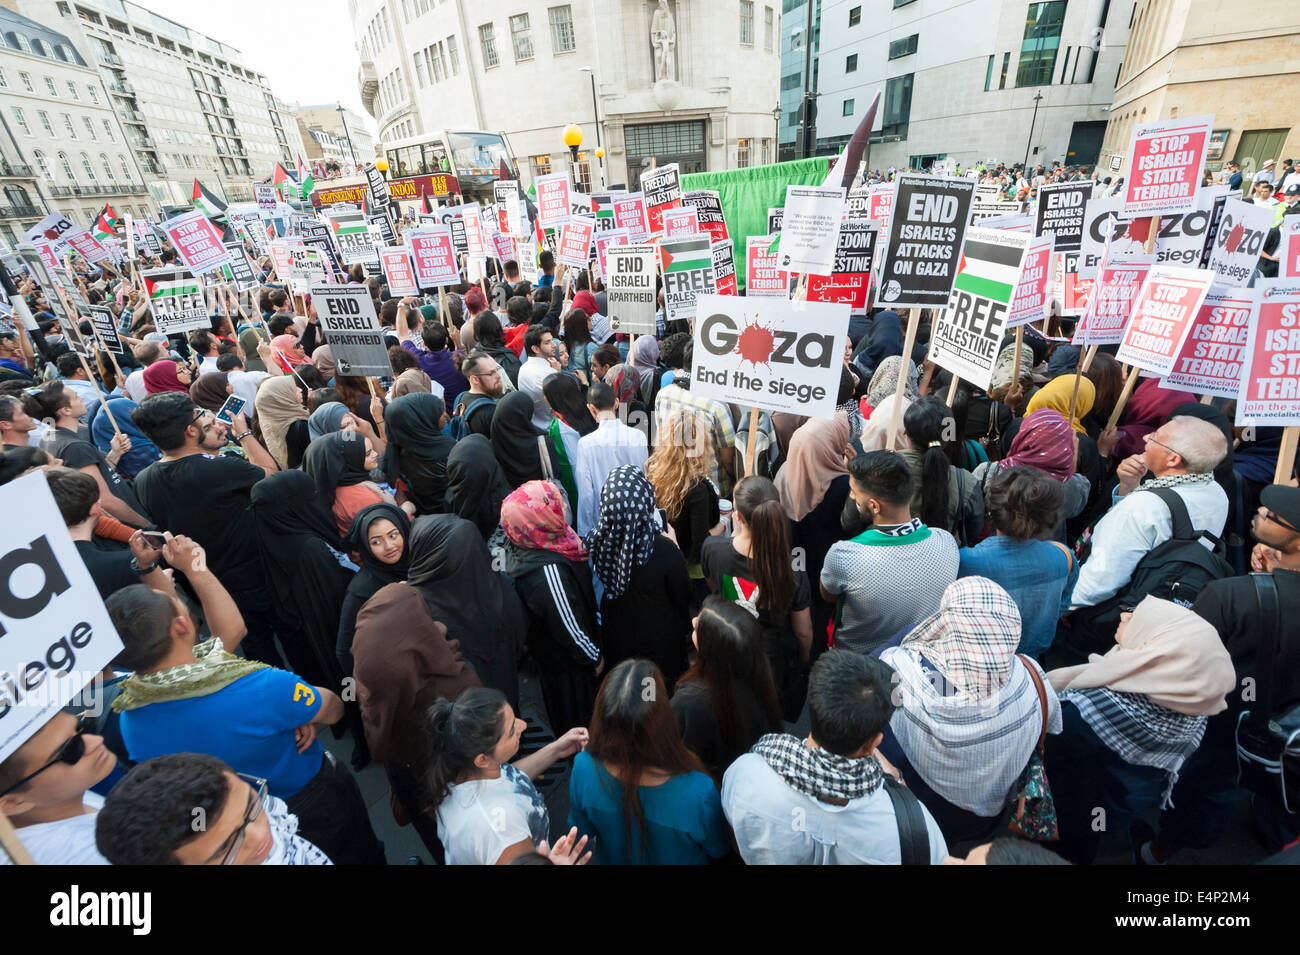 Portland Place, London, UK. 15th July 2014. Thousands of protesters demonstrate outside the BBC in London in response to the corporation's perceived bias against Palestinian reporting in the current Gaza crisis. Credit:  Lee Thomas/Alamy Live News Stock Photo